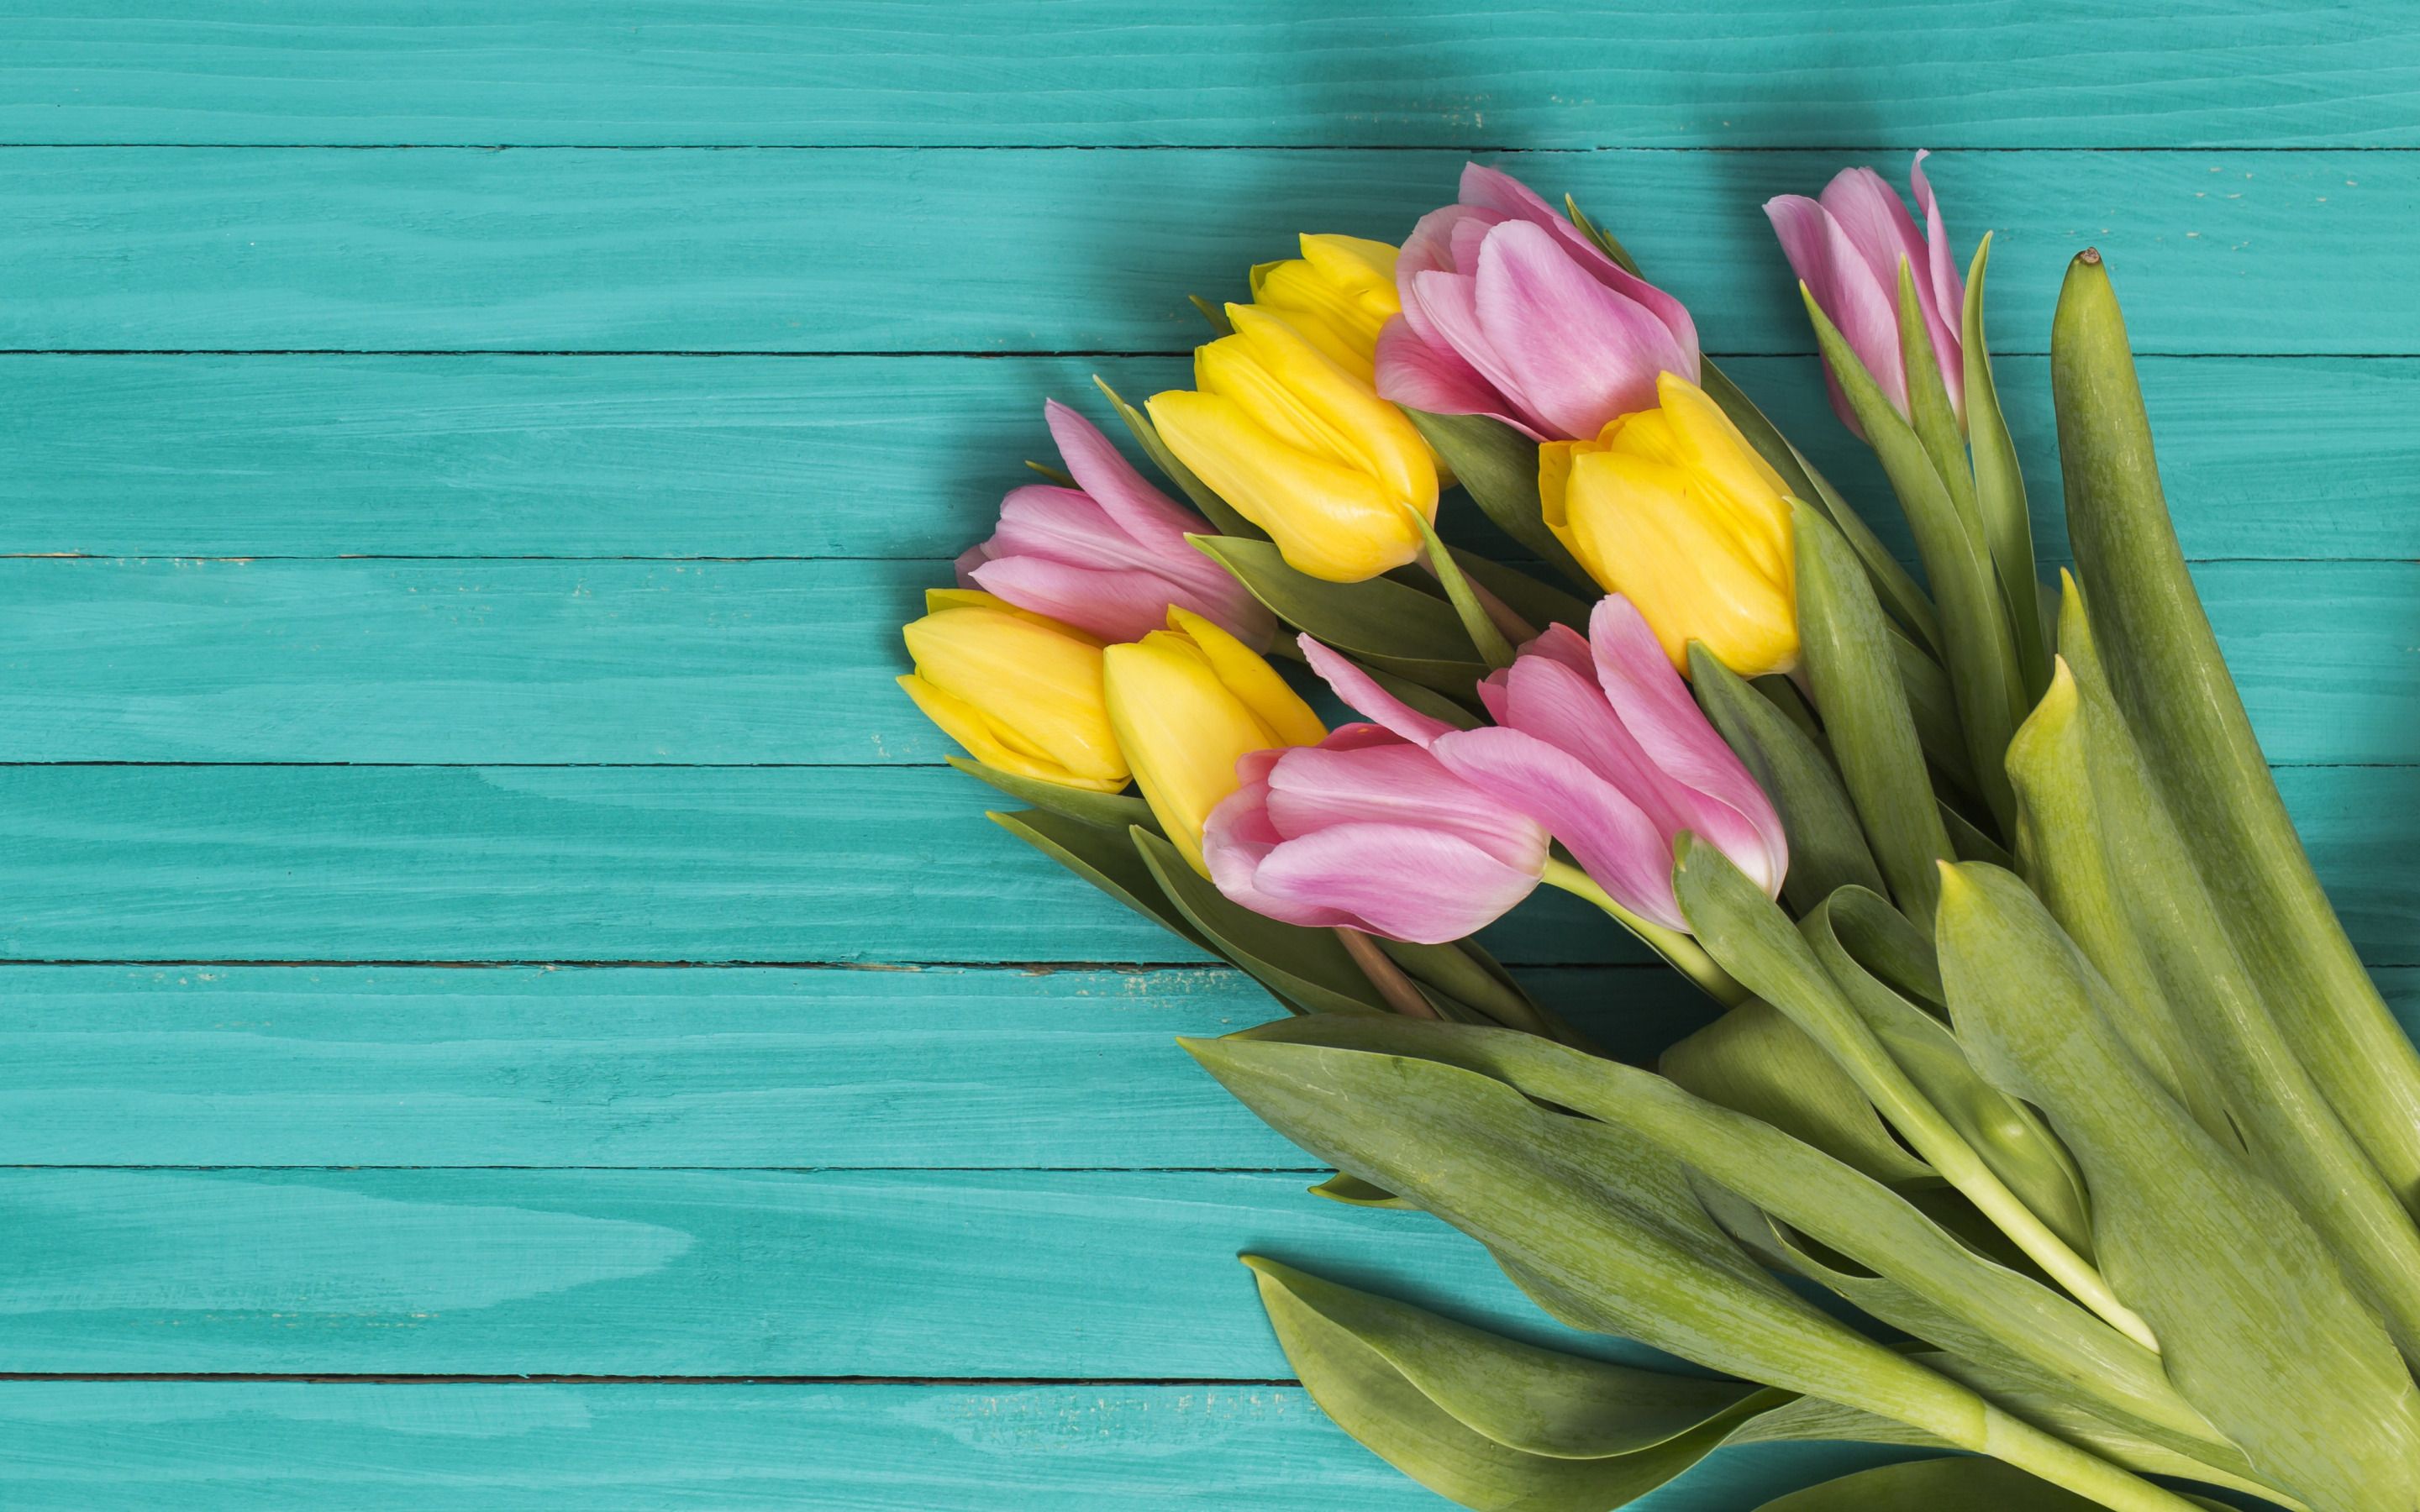 Download wallpaper bouquet of tulips, blue wooden background